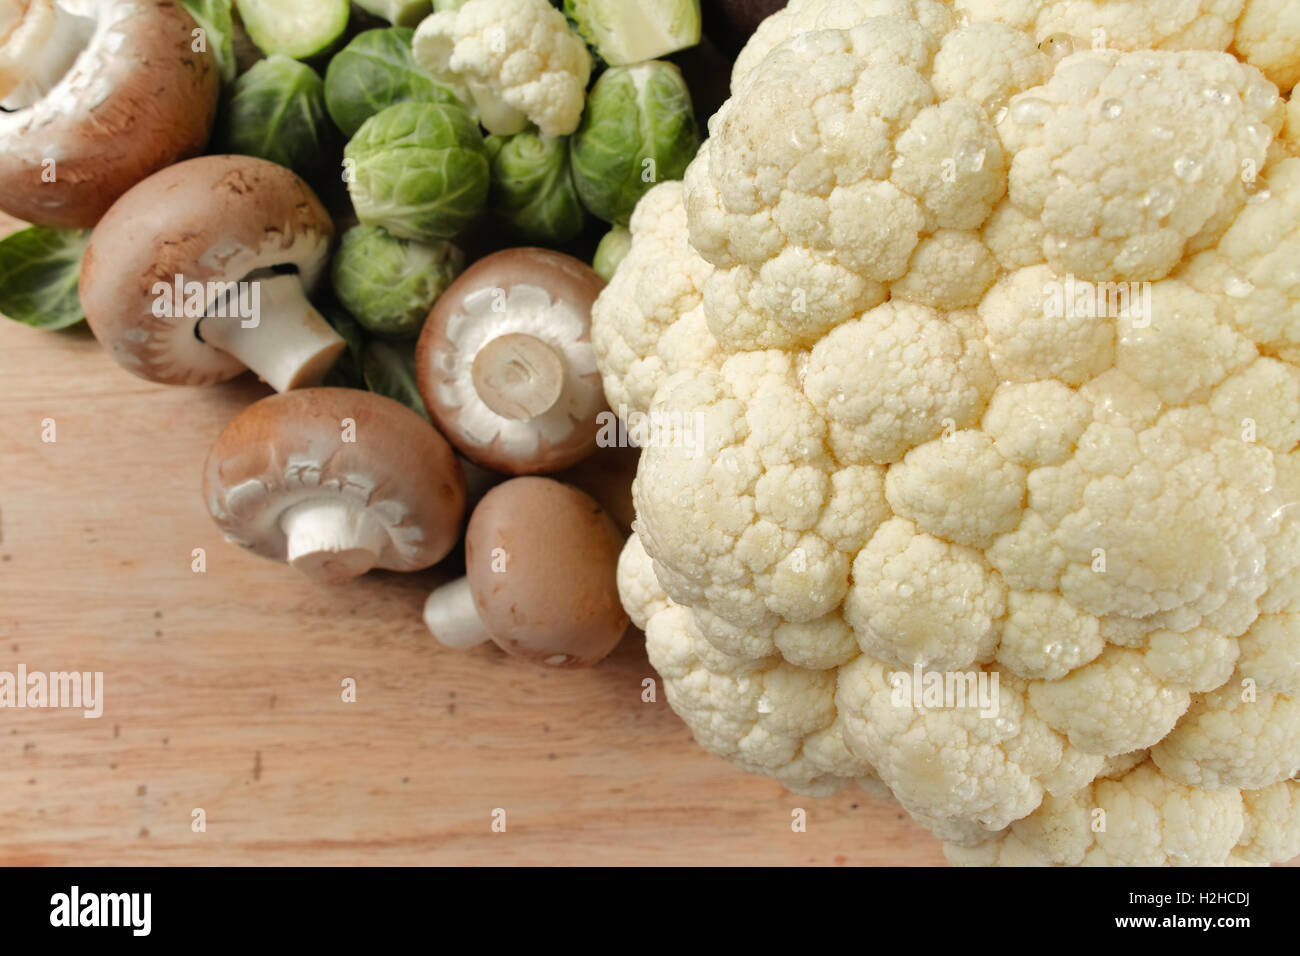 Cauliflower, mushrooms and Brussels sprouts - fresh healthy vegetables for cooking Stock Photo